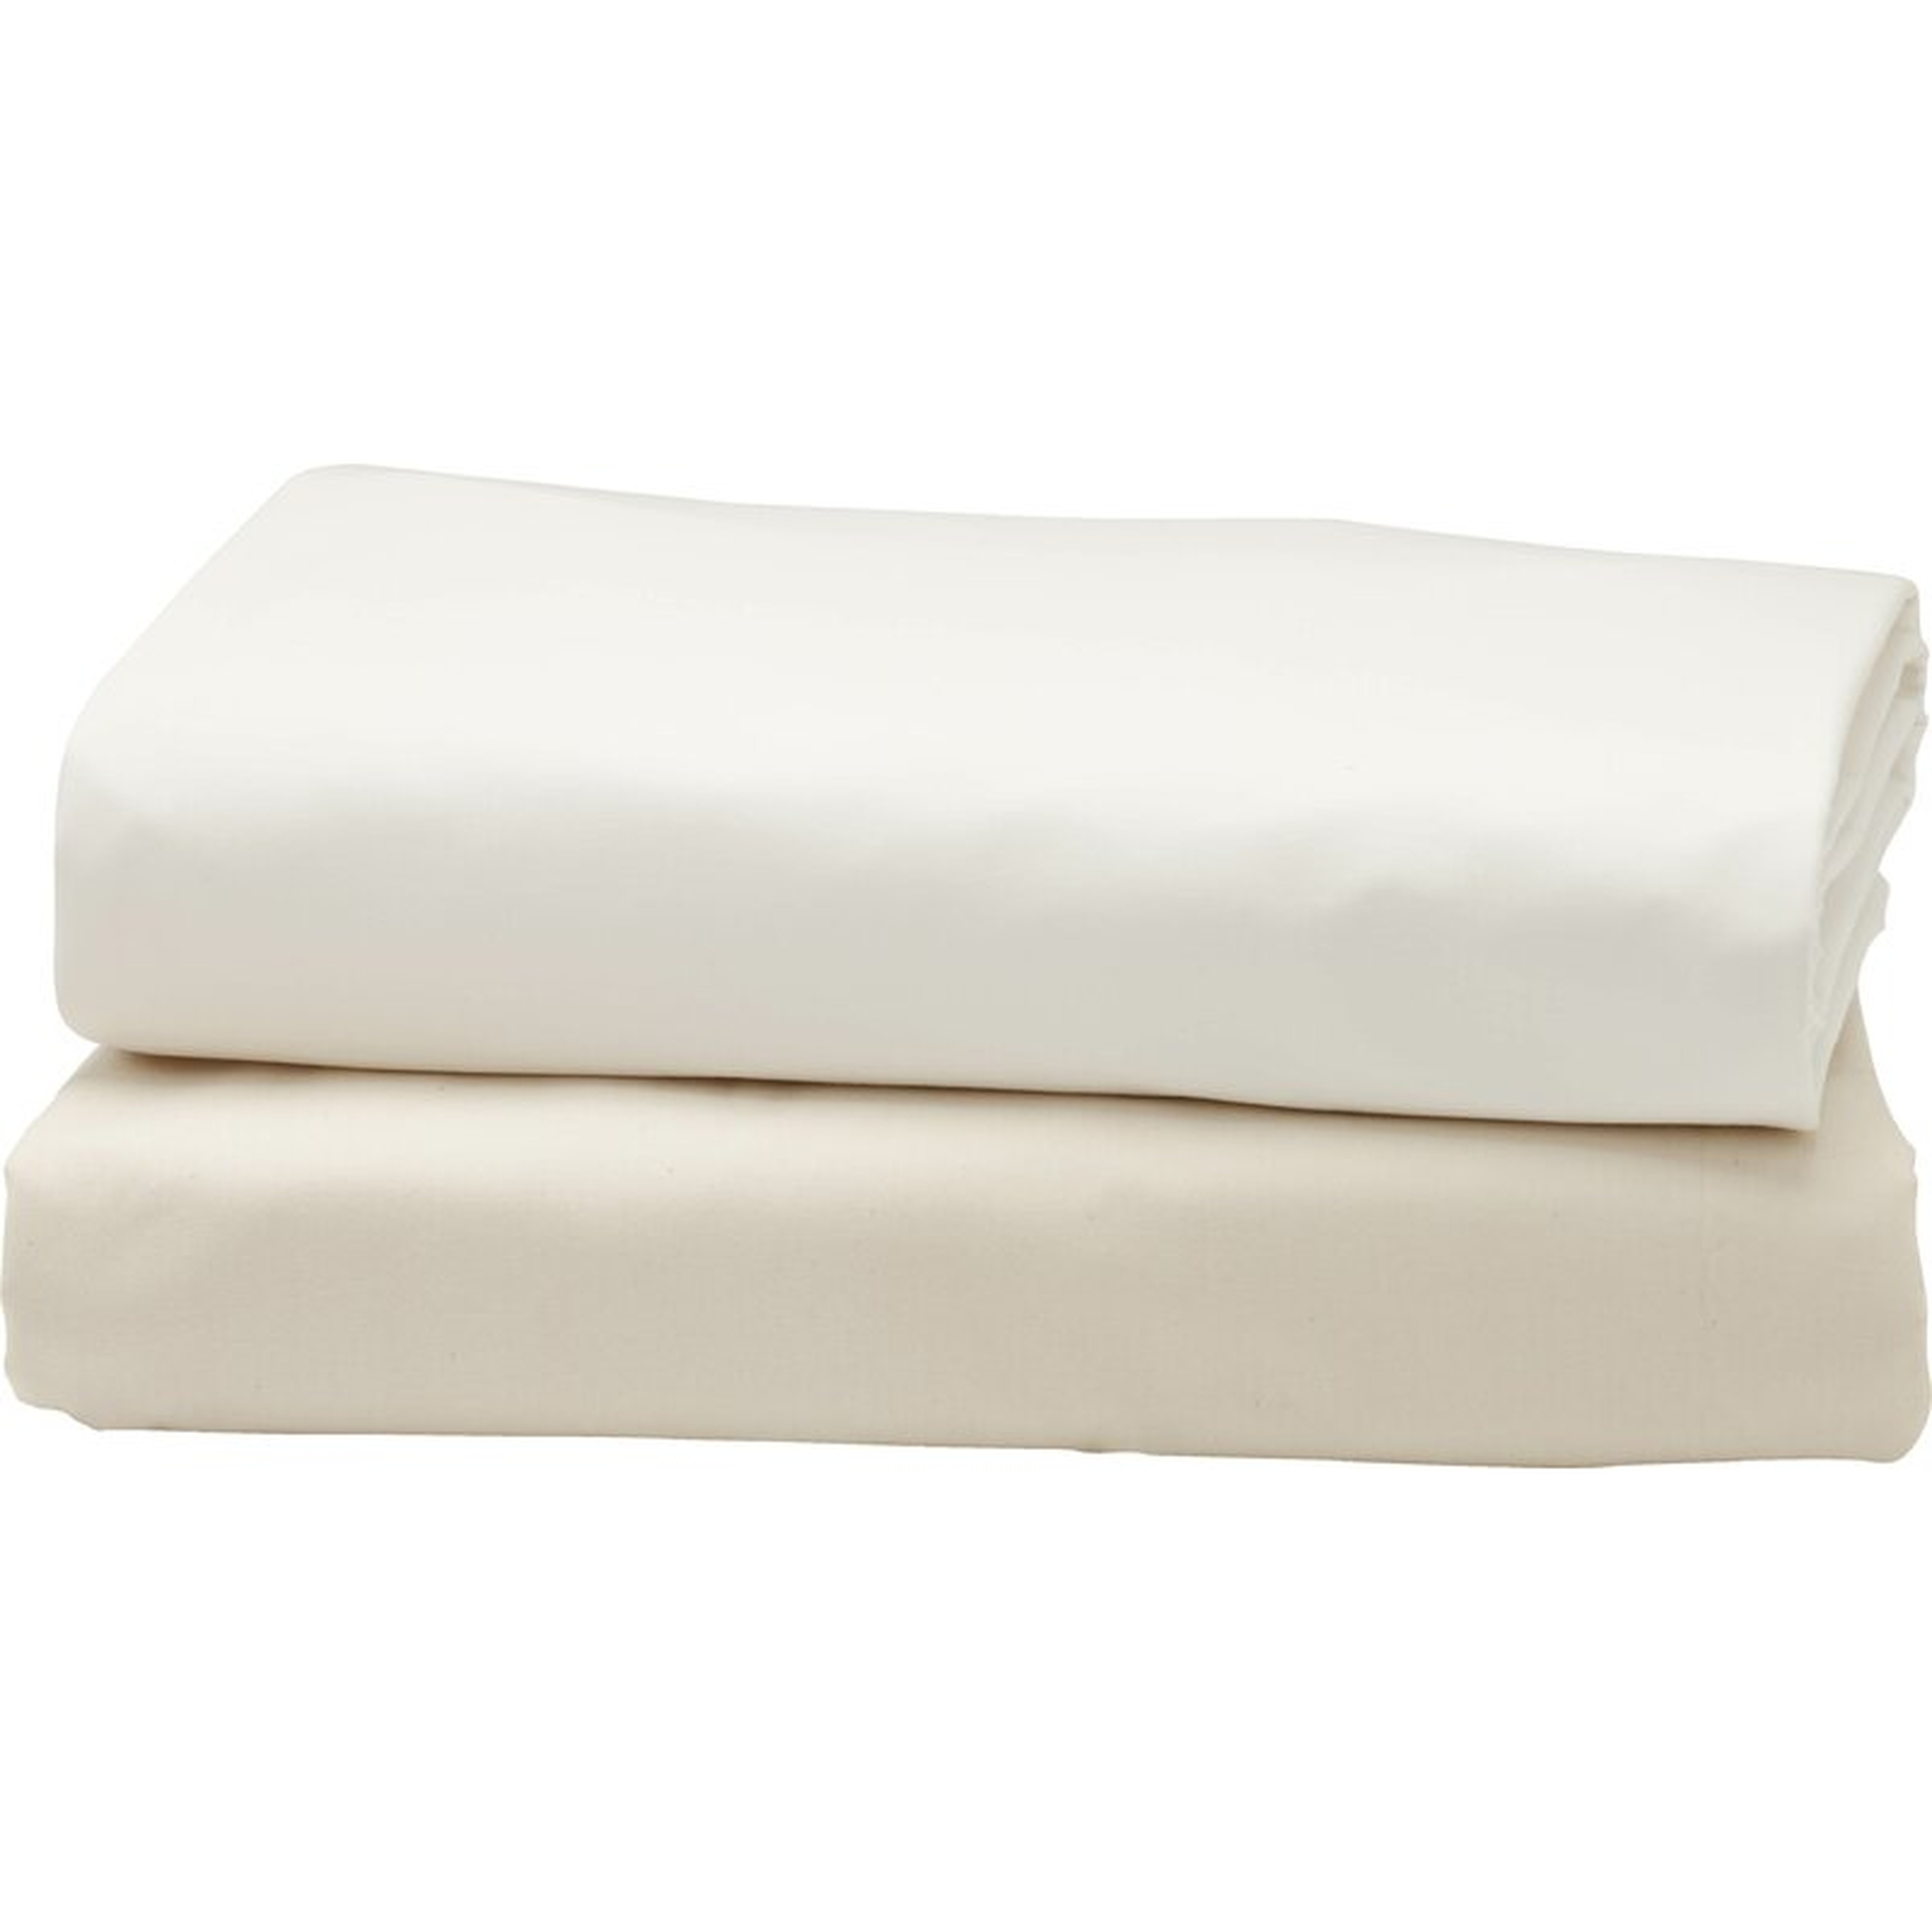 Coyuchi Fitted 300 Thread Count 100% Cotton Percale Fitted Sheet Size: Twin, Color: Quartz - Perigold